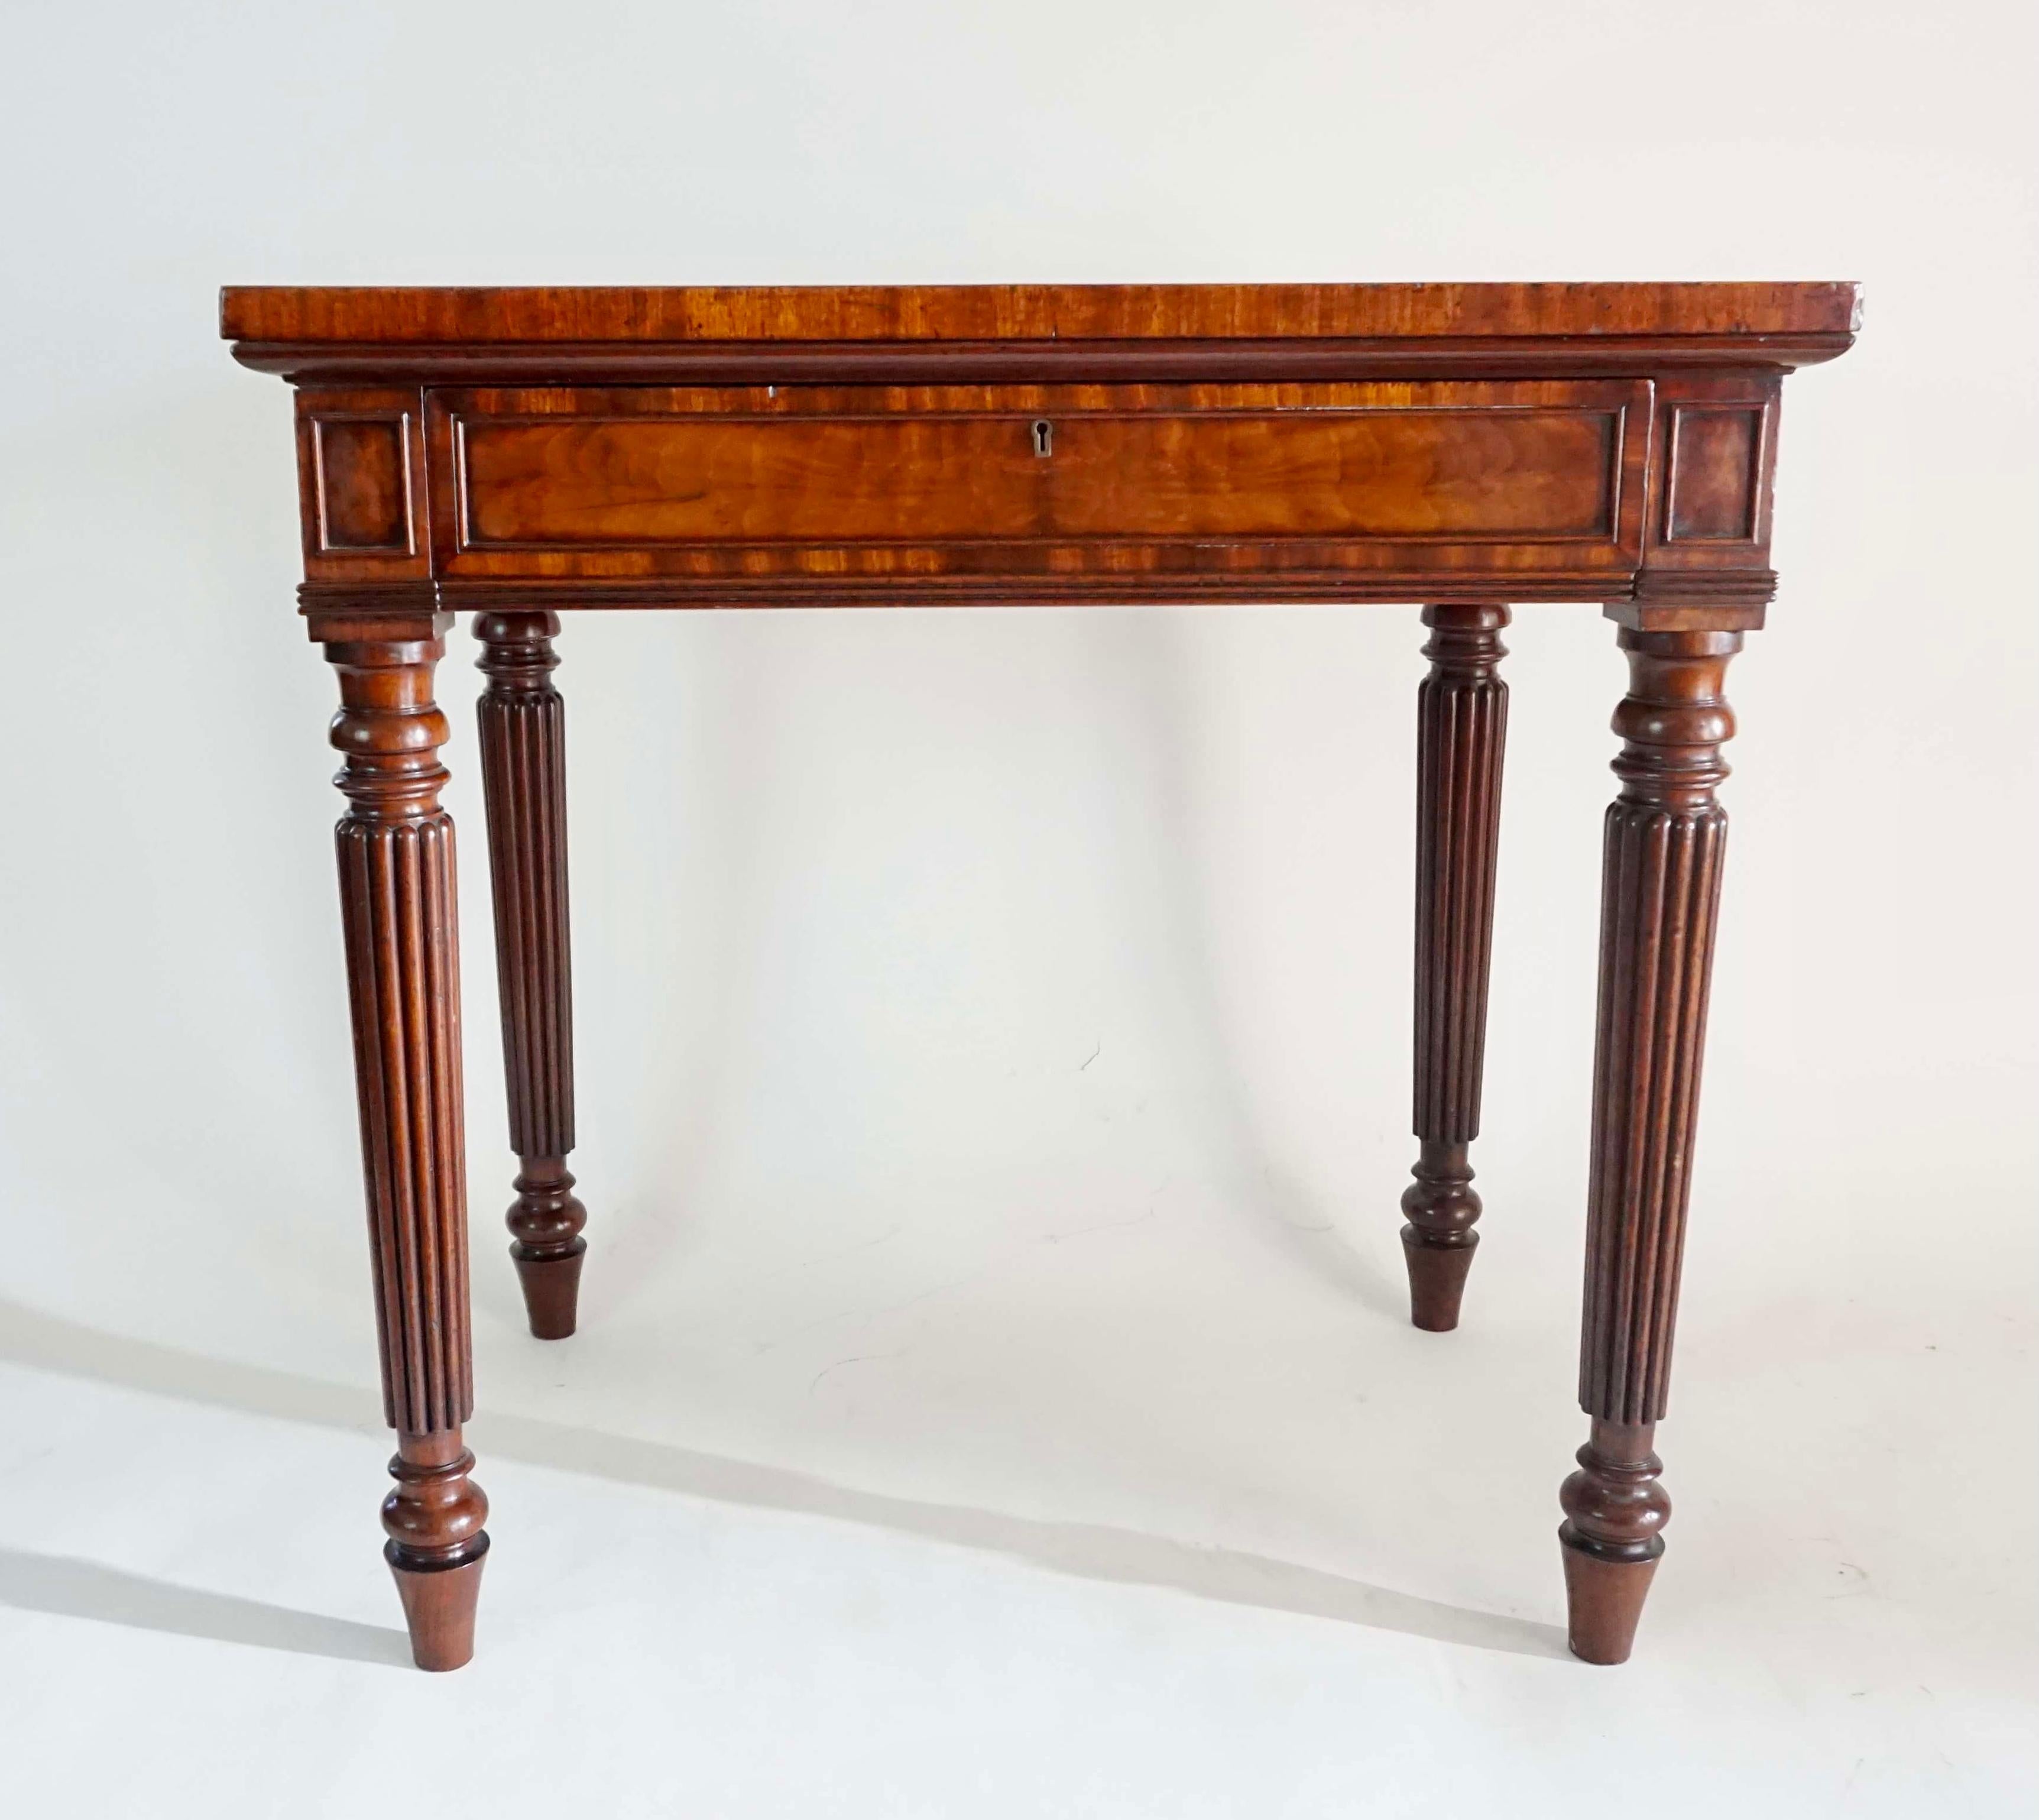 An extremely fine circa 1820 side or writing table by legendary English cabinetmaking firm of Gillows of Lancaster and London of rectangular form having an exquisitely grained solid 'crocodile' mahogany top on solid mahogany base having 'wainscot'